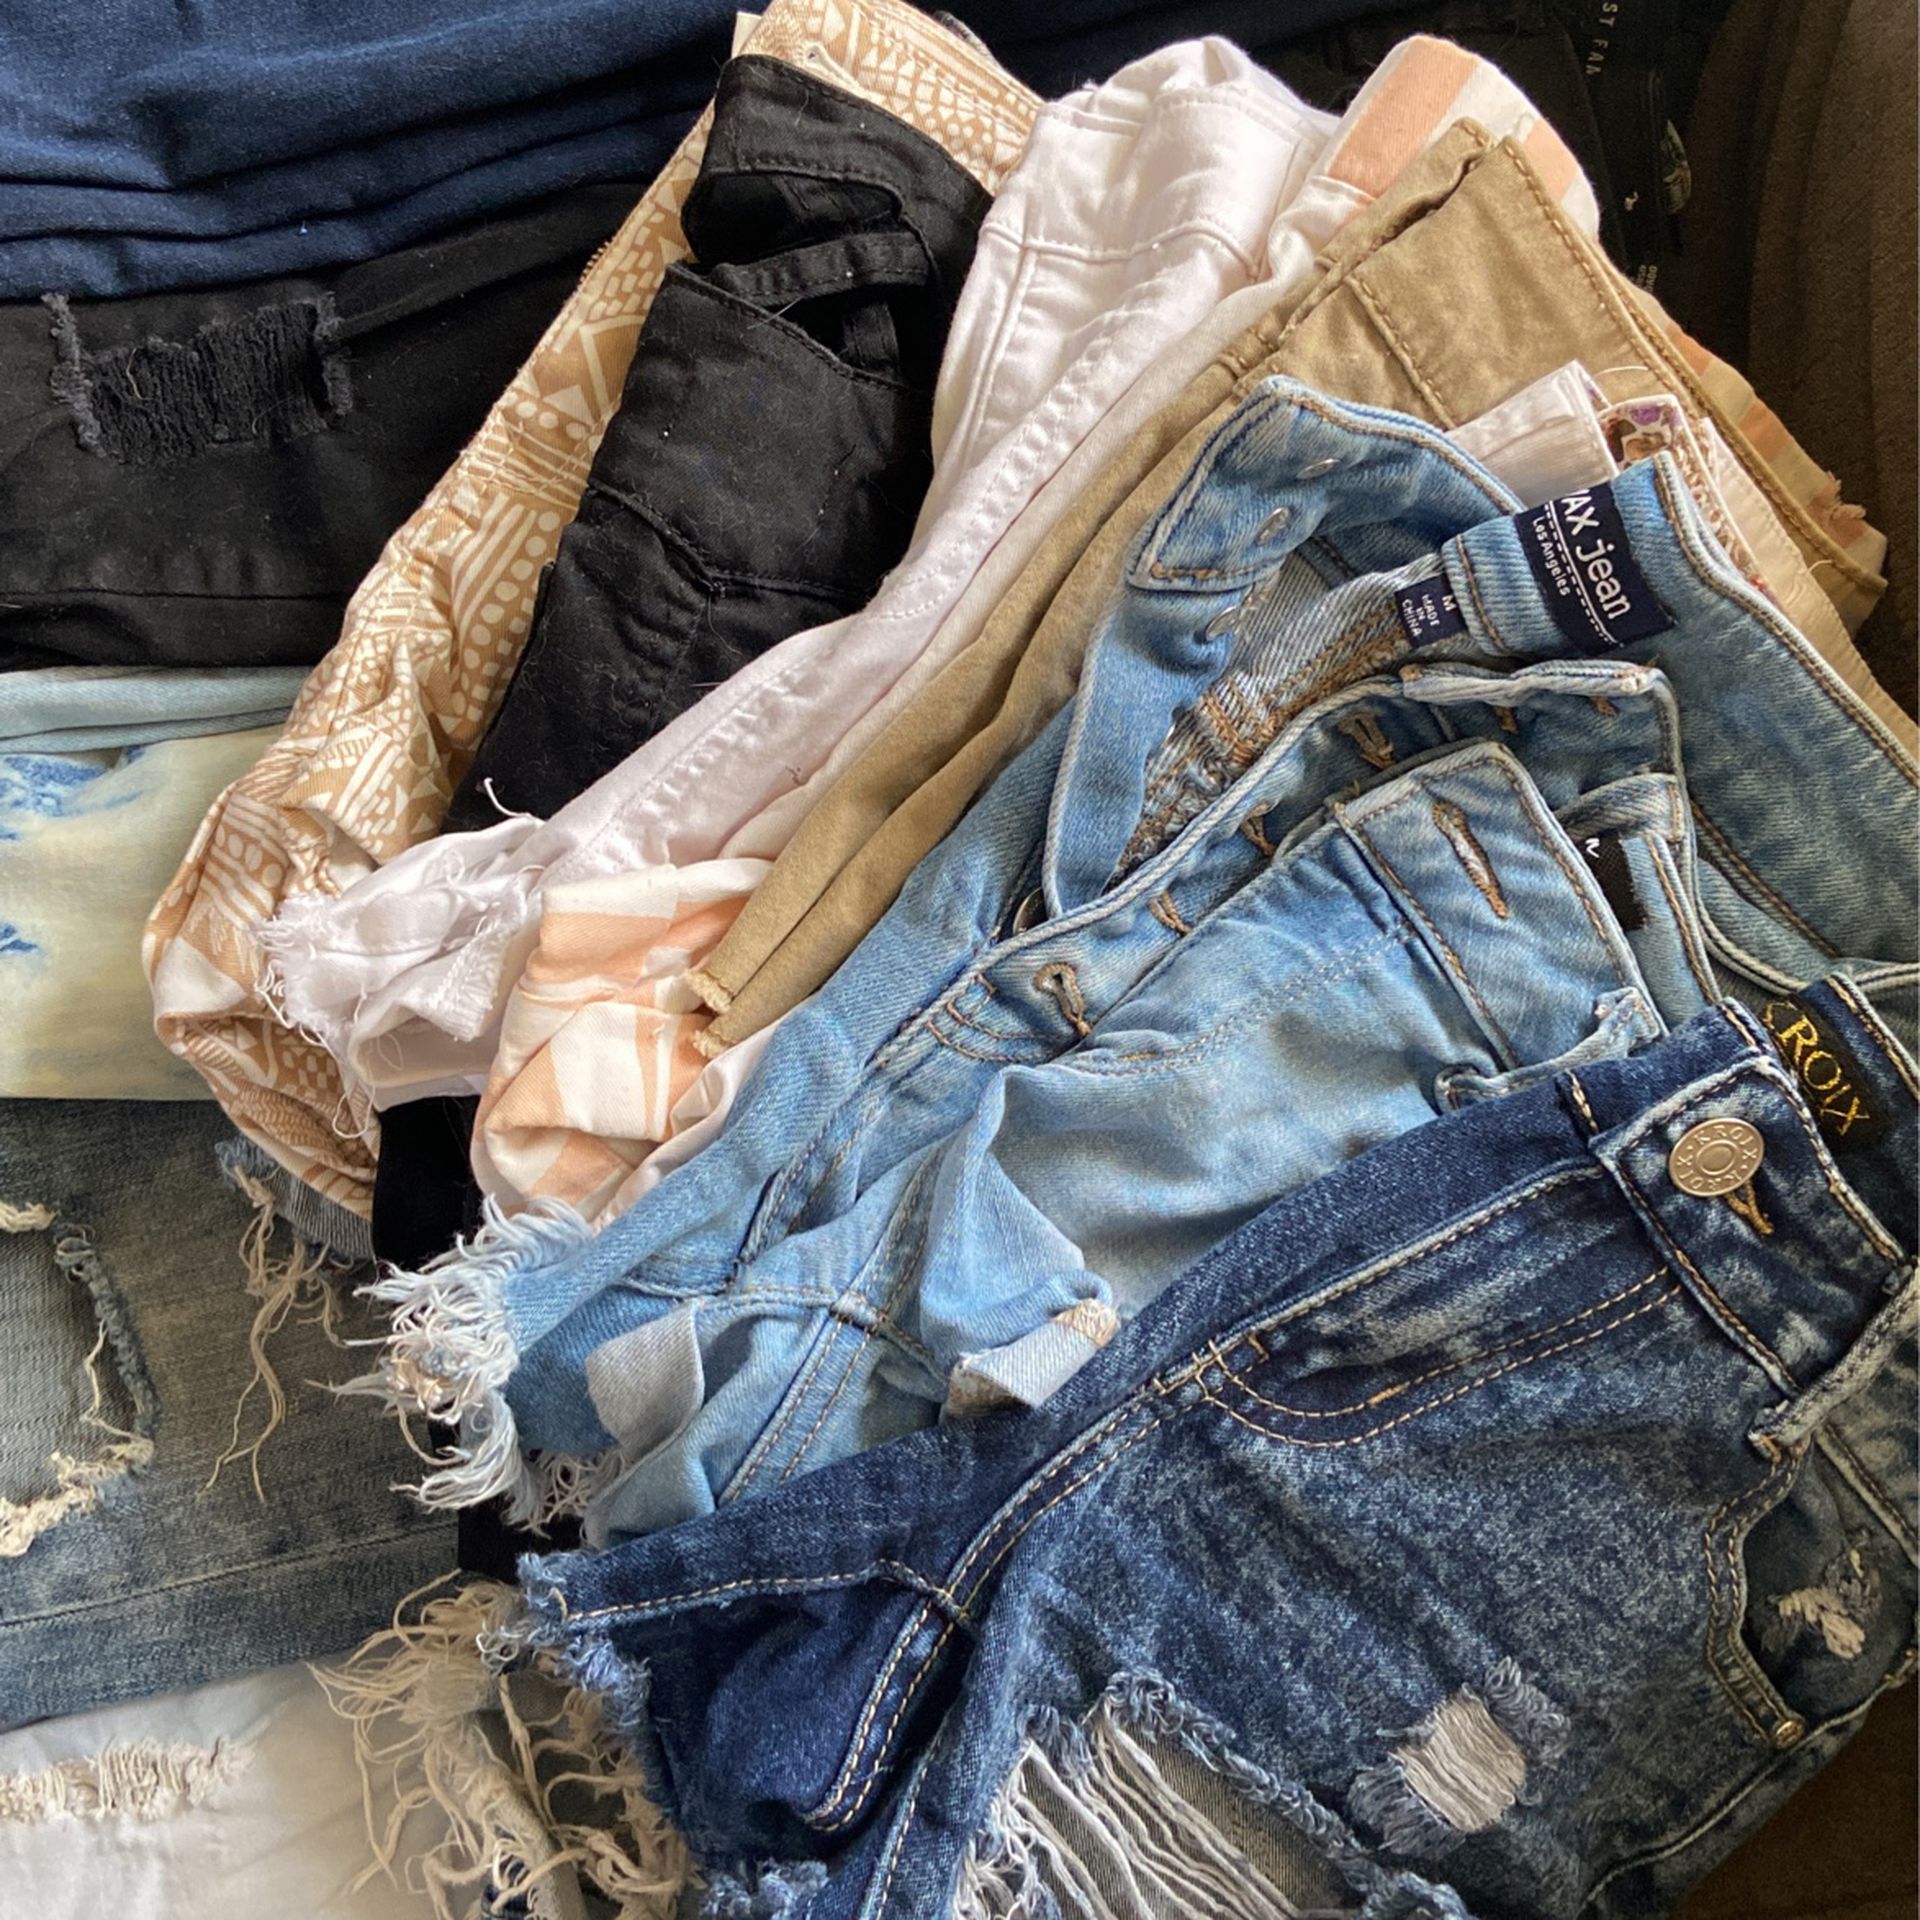 Clothes Size 3-5 Jeans And small-Med Shirts And Dresses